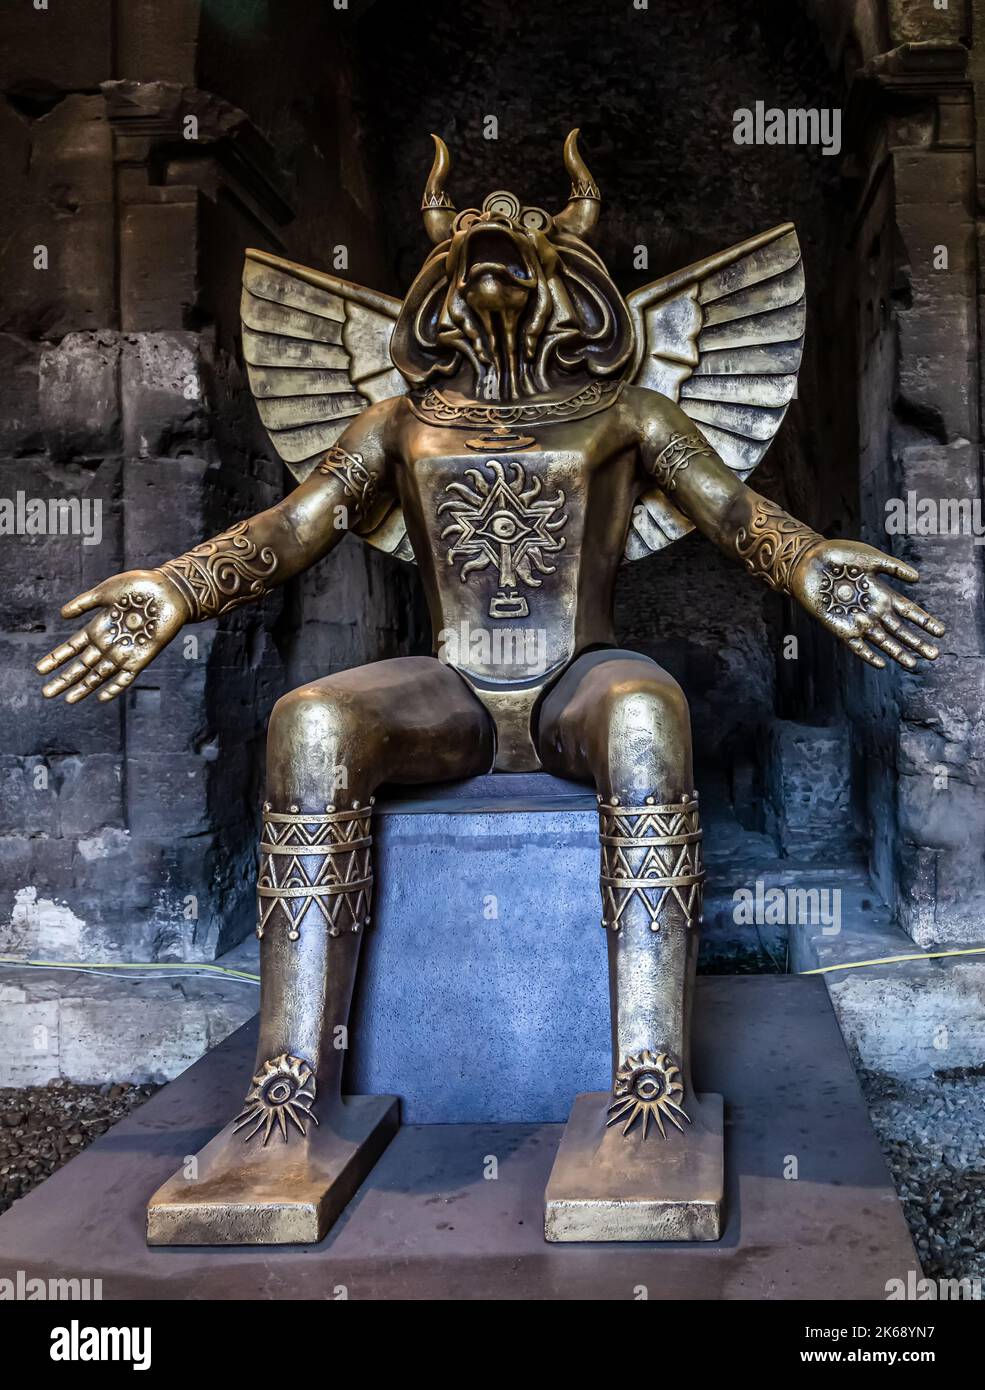 ROME, ITALY - DECEMBER 01, 2019:  Statue of pagan god Moloch ( Molech ) placed at the entrance to the Colosseum în Rome, Italy Stock Photo